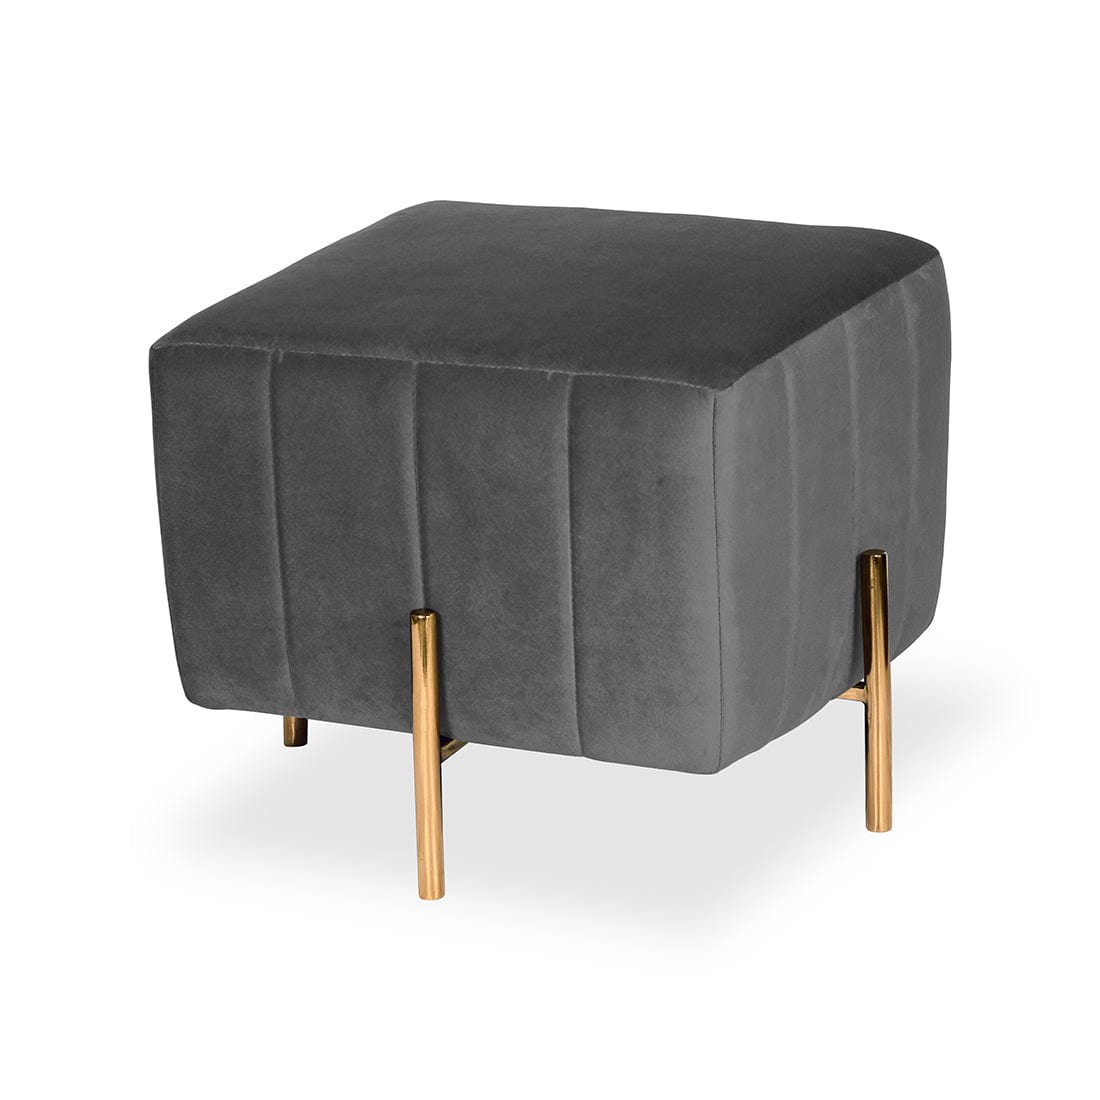 DOE BUCK SQUARE GOLD OTTOMAN STAINLESS STEEL IN GREY